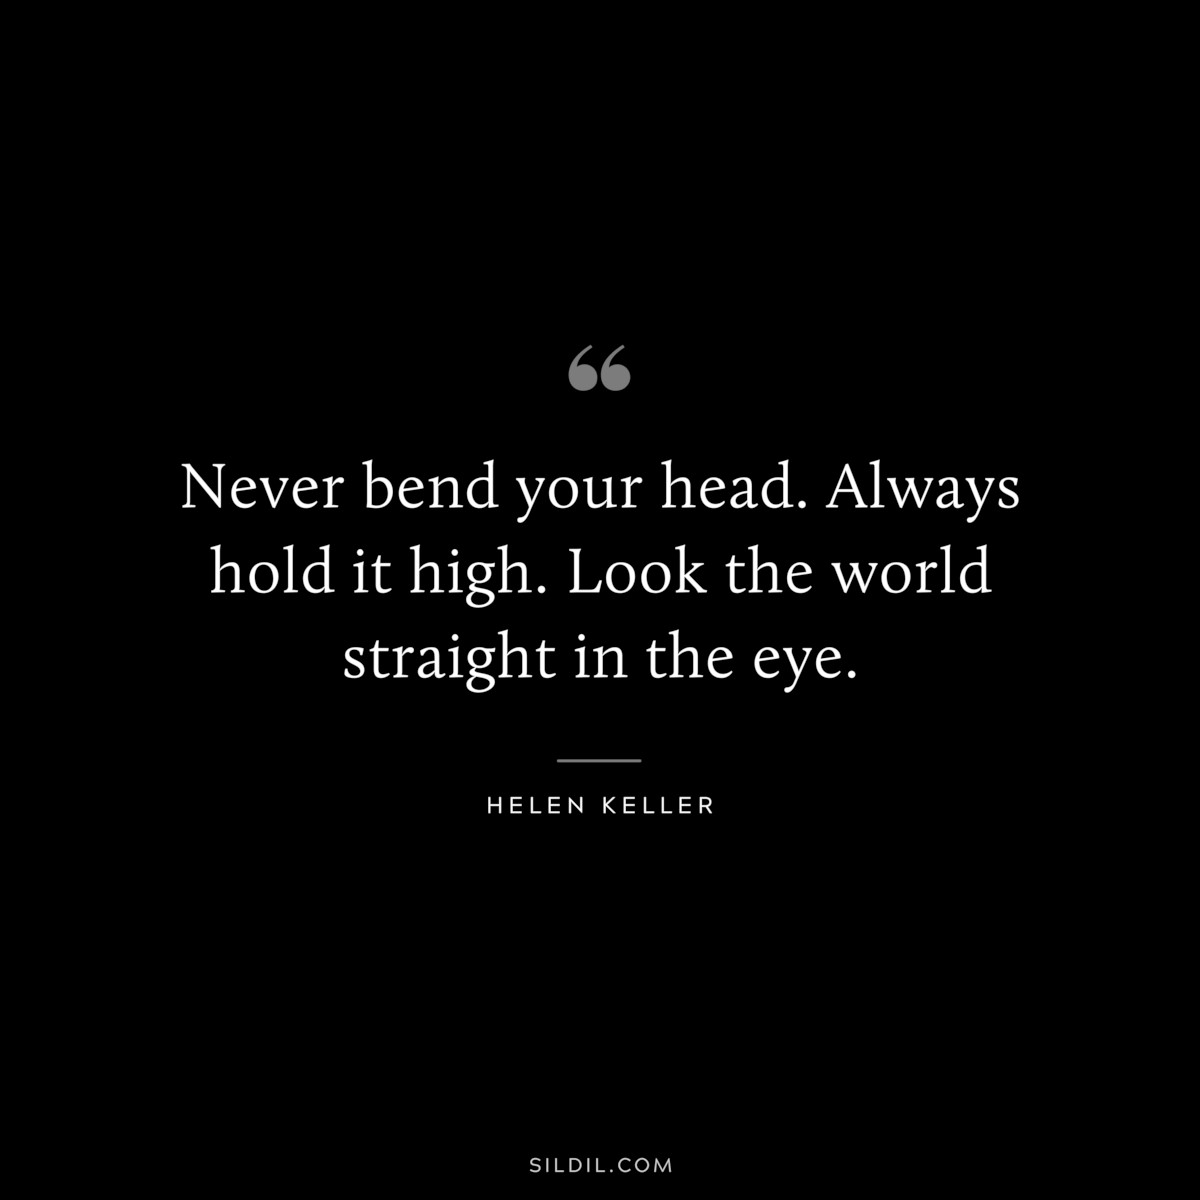 Never bend your head. Always hold it high. Look the world straight in the eye. ― Helen Keller